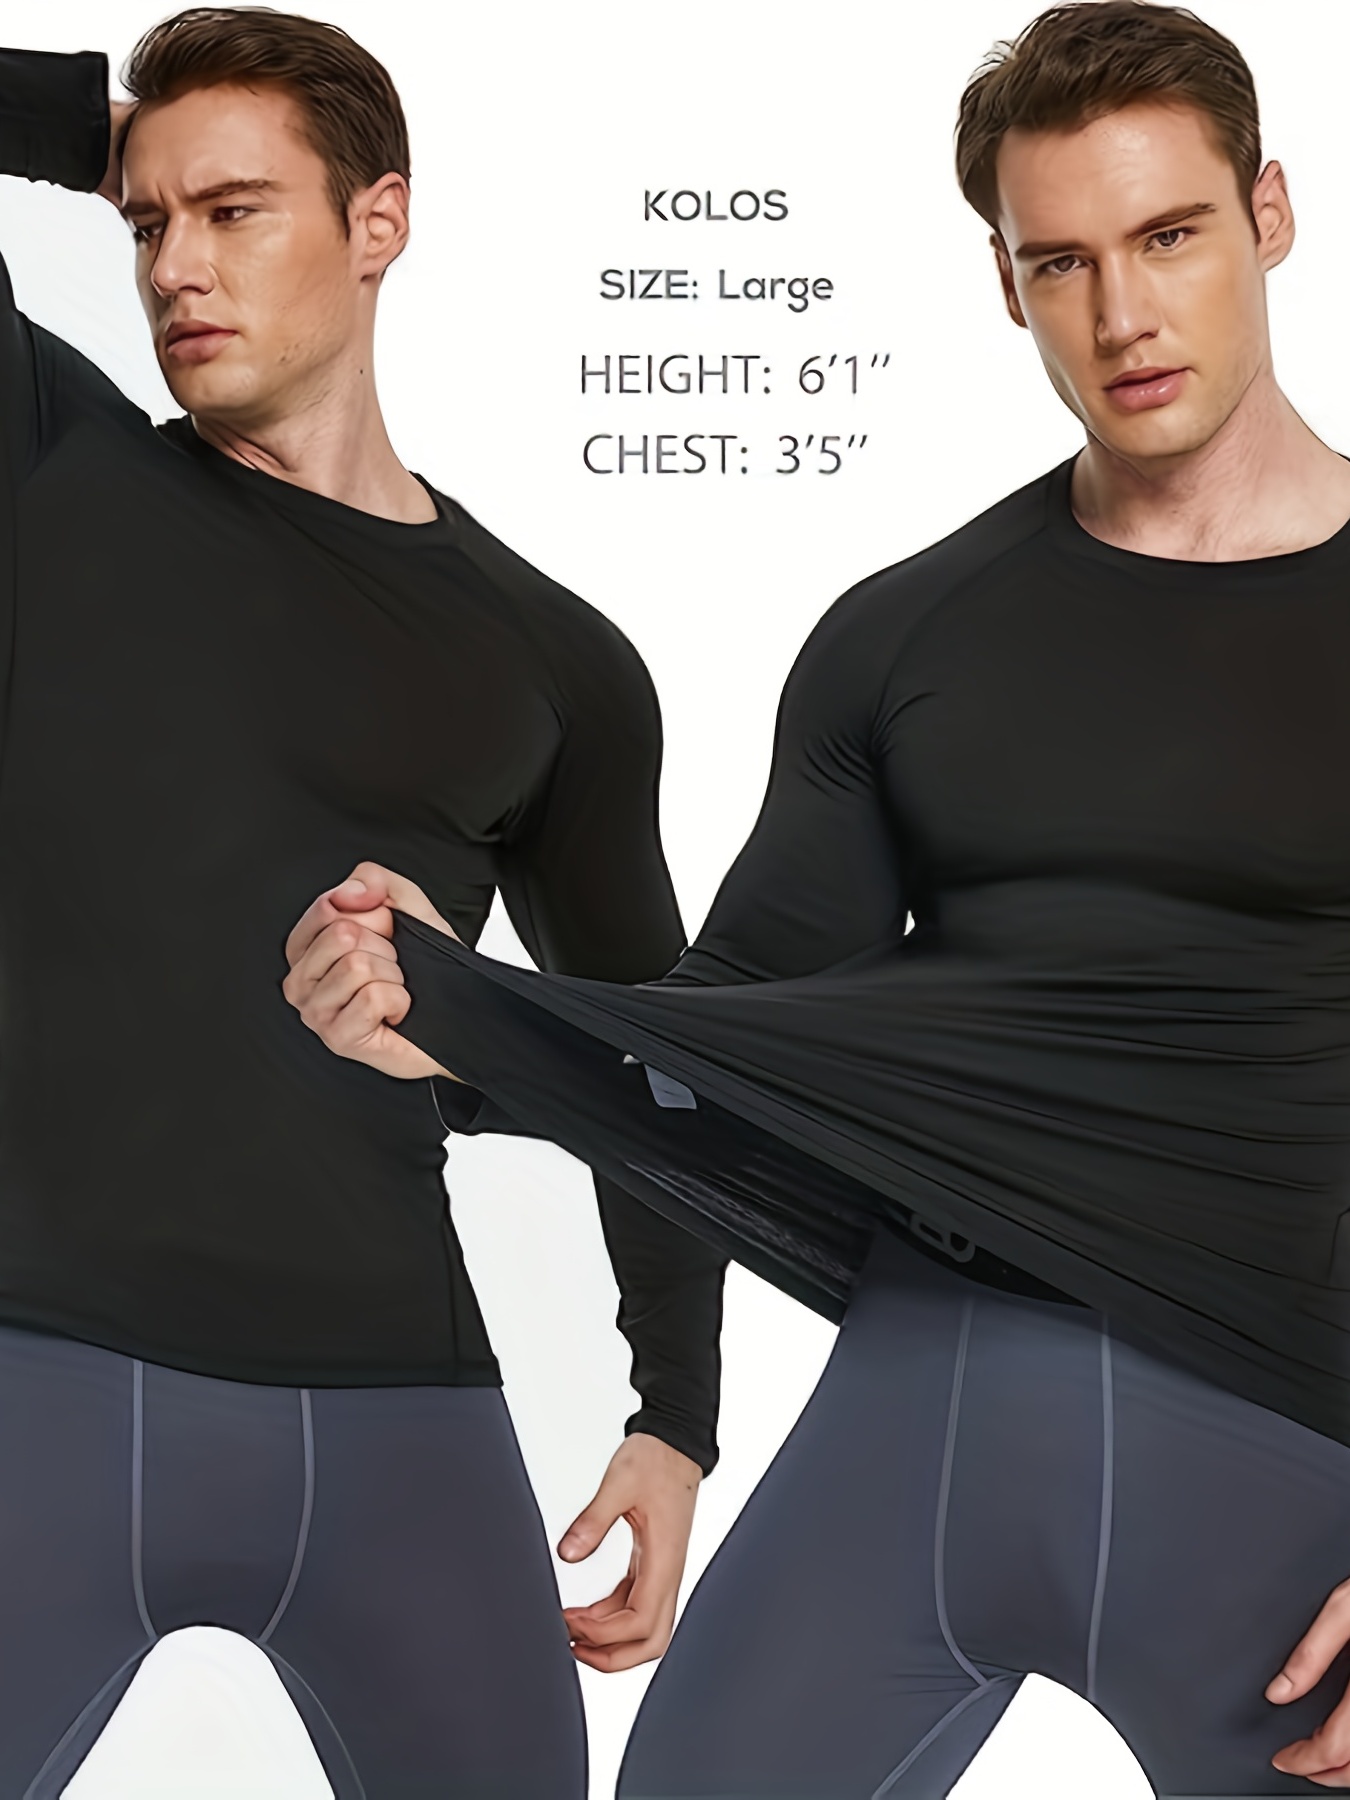 5 Best Long Sleeve Compression Shirts